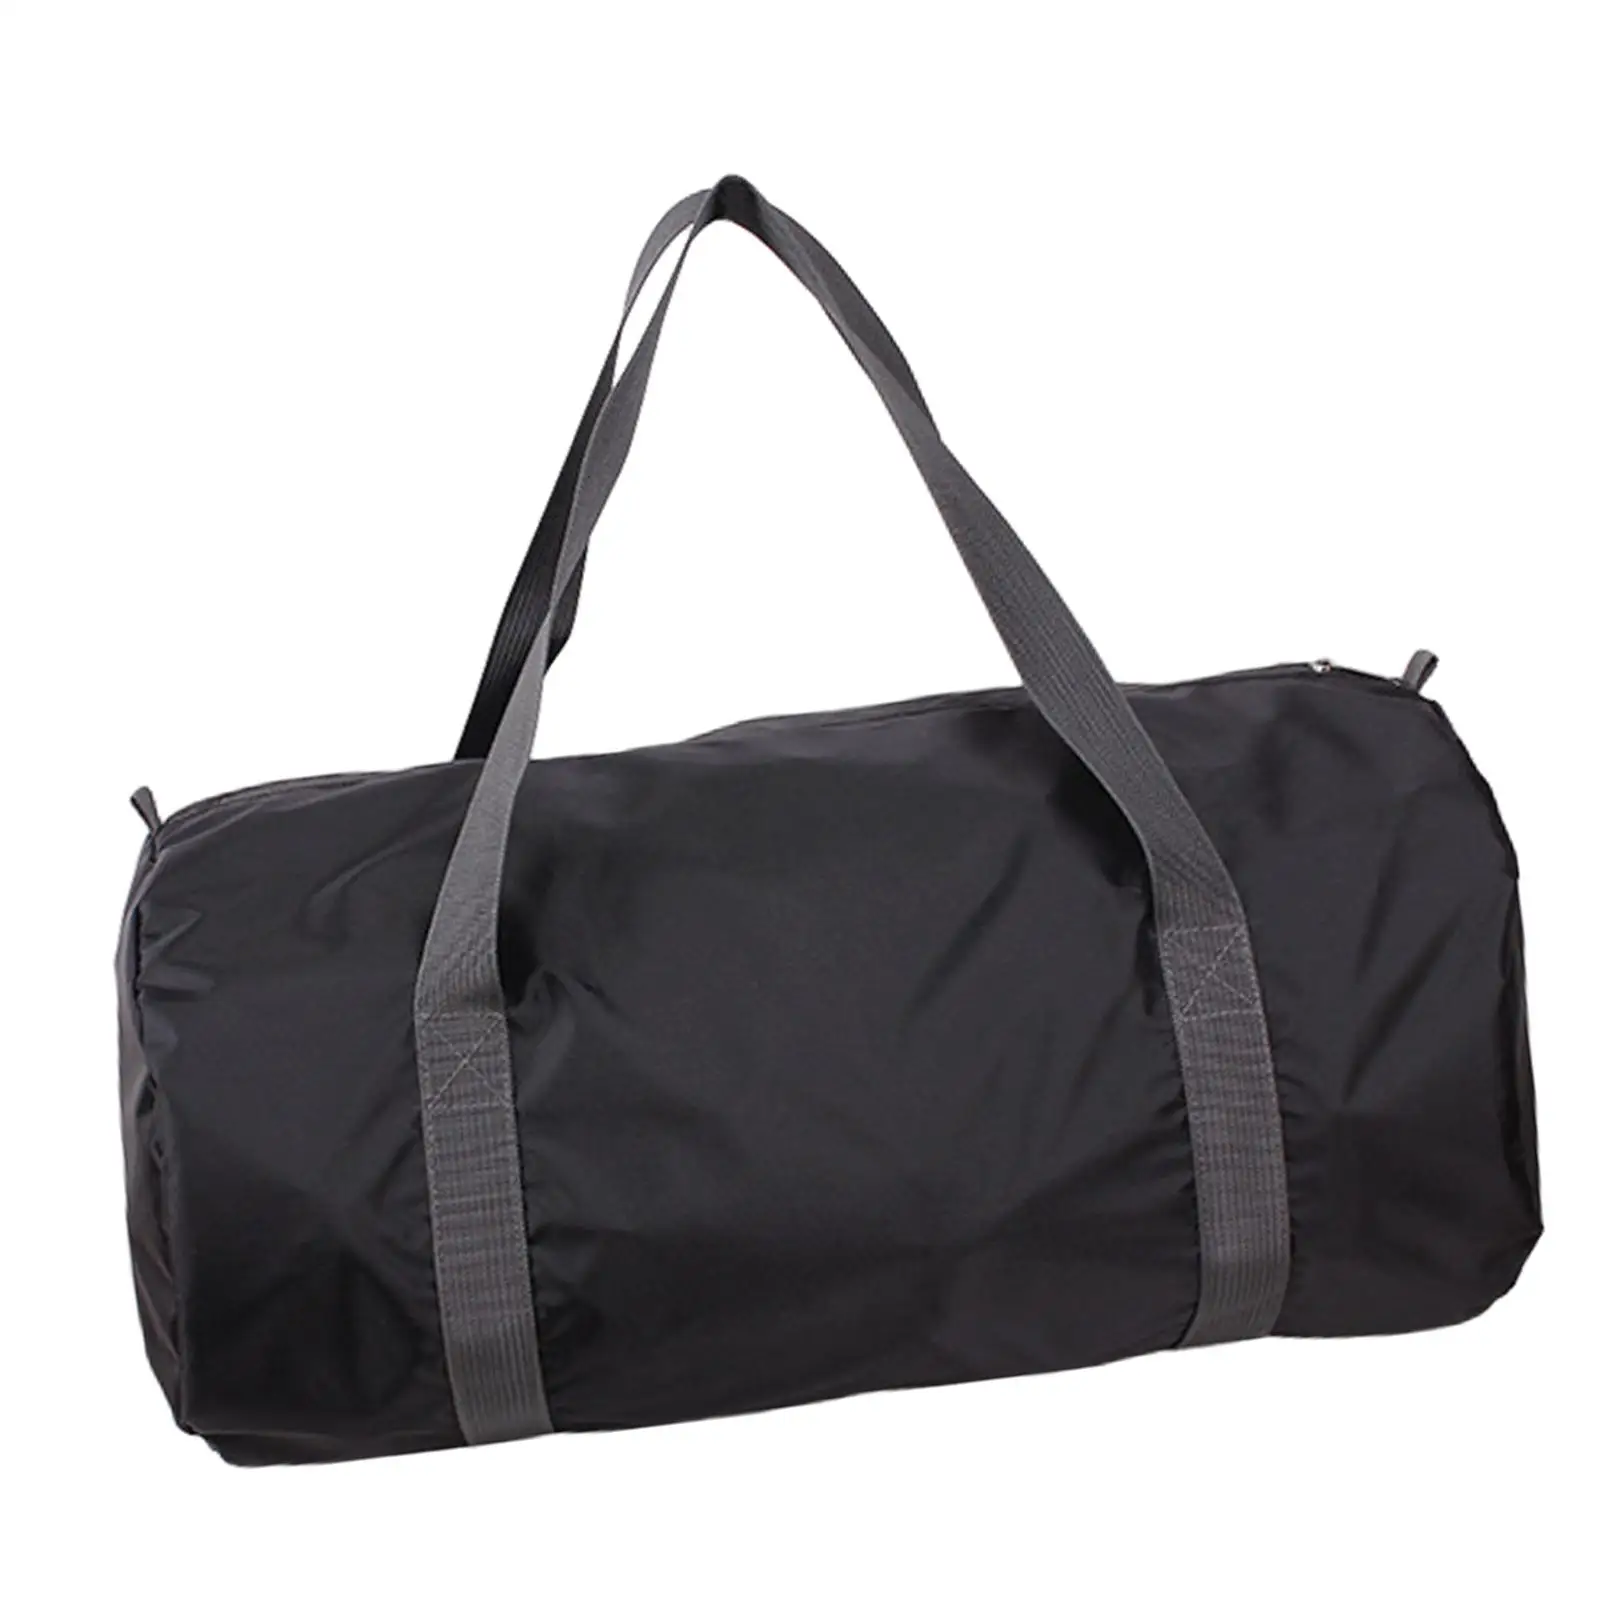 Camping Storage Bag Luggage Equipment Stuff Pouch Travel Duffel Tote Bag for Clothes Outdoor Sports Sports Backpacking Fishing